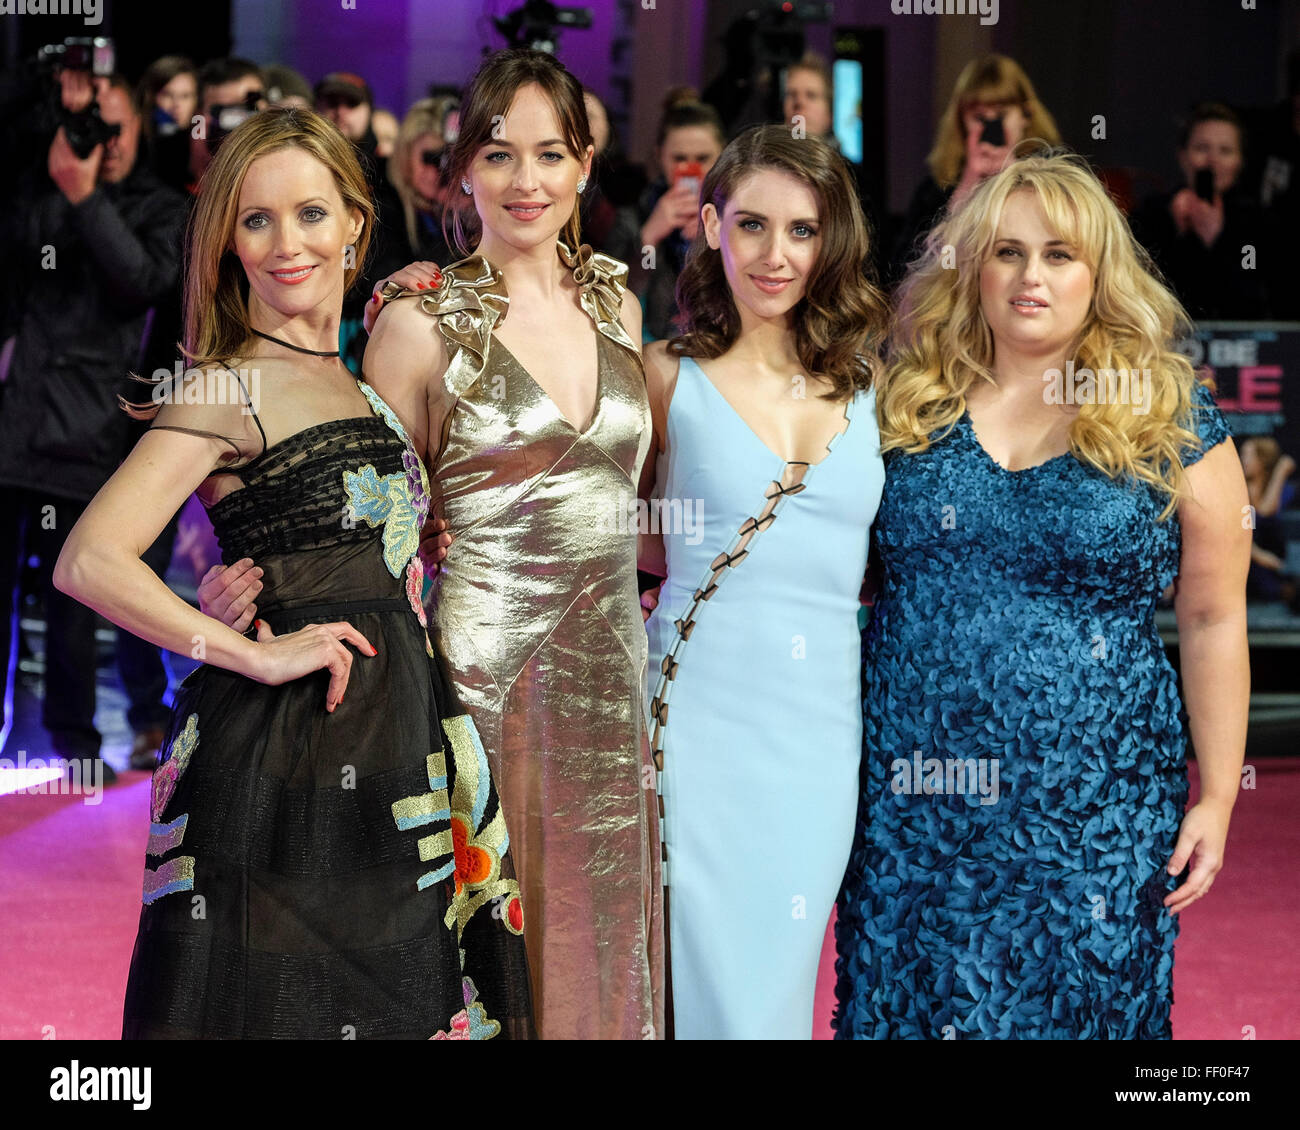 The cast arrives on the red carpet for the European Premiere of “How To Be Single” on 09/02/2016 at The VUE West End, London. Pictured: Dakota Johnson, Rebel Wilson, Alison Brie, Leslie Mann. Picture by Julie Edwards/Alamy Live News. Stock Photo